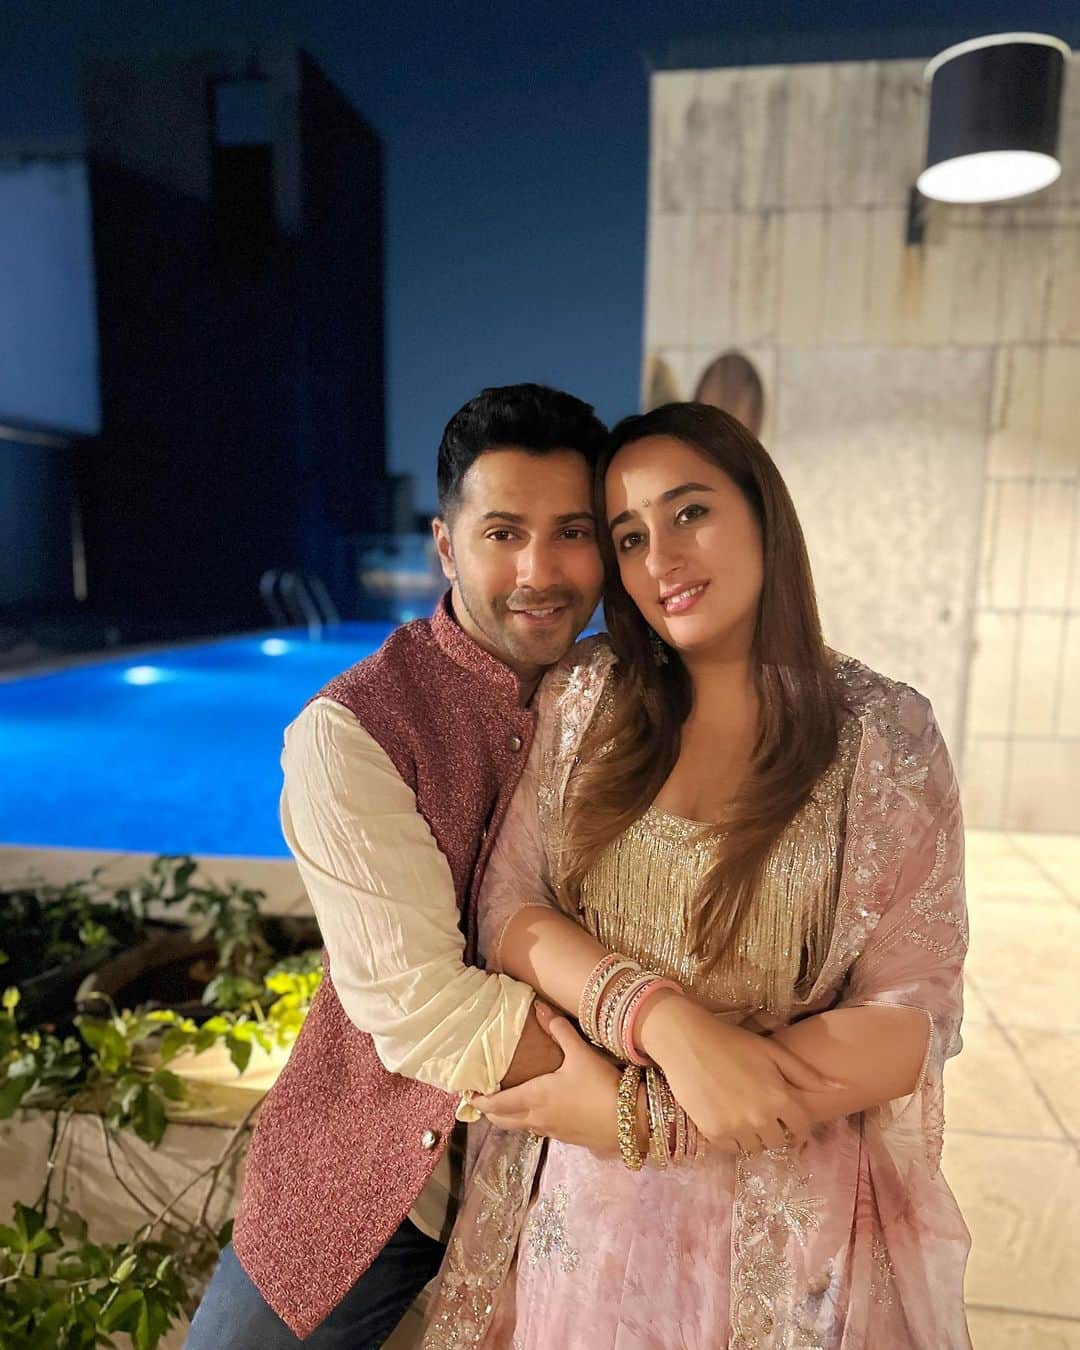 Varun Dhawanのインスタグラム：「Happy karvachauth to everyone out there celebrating. Wishing safety and peace to all. Bharatya naari sab be bhaari though natasha is really light so love making her sit on my lap」